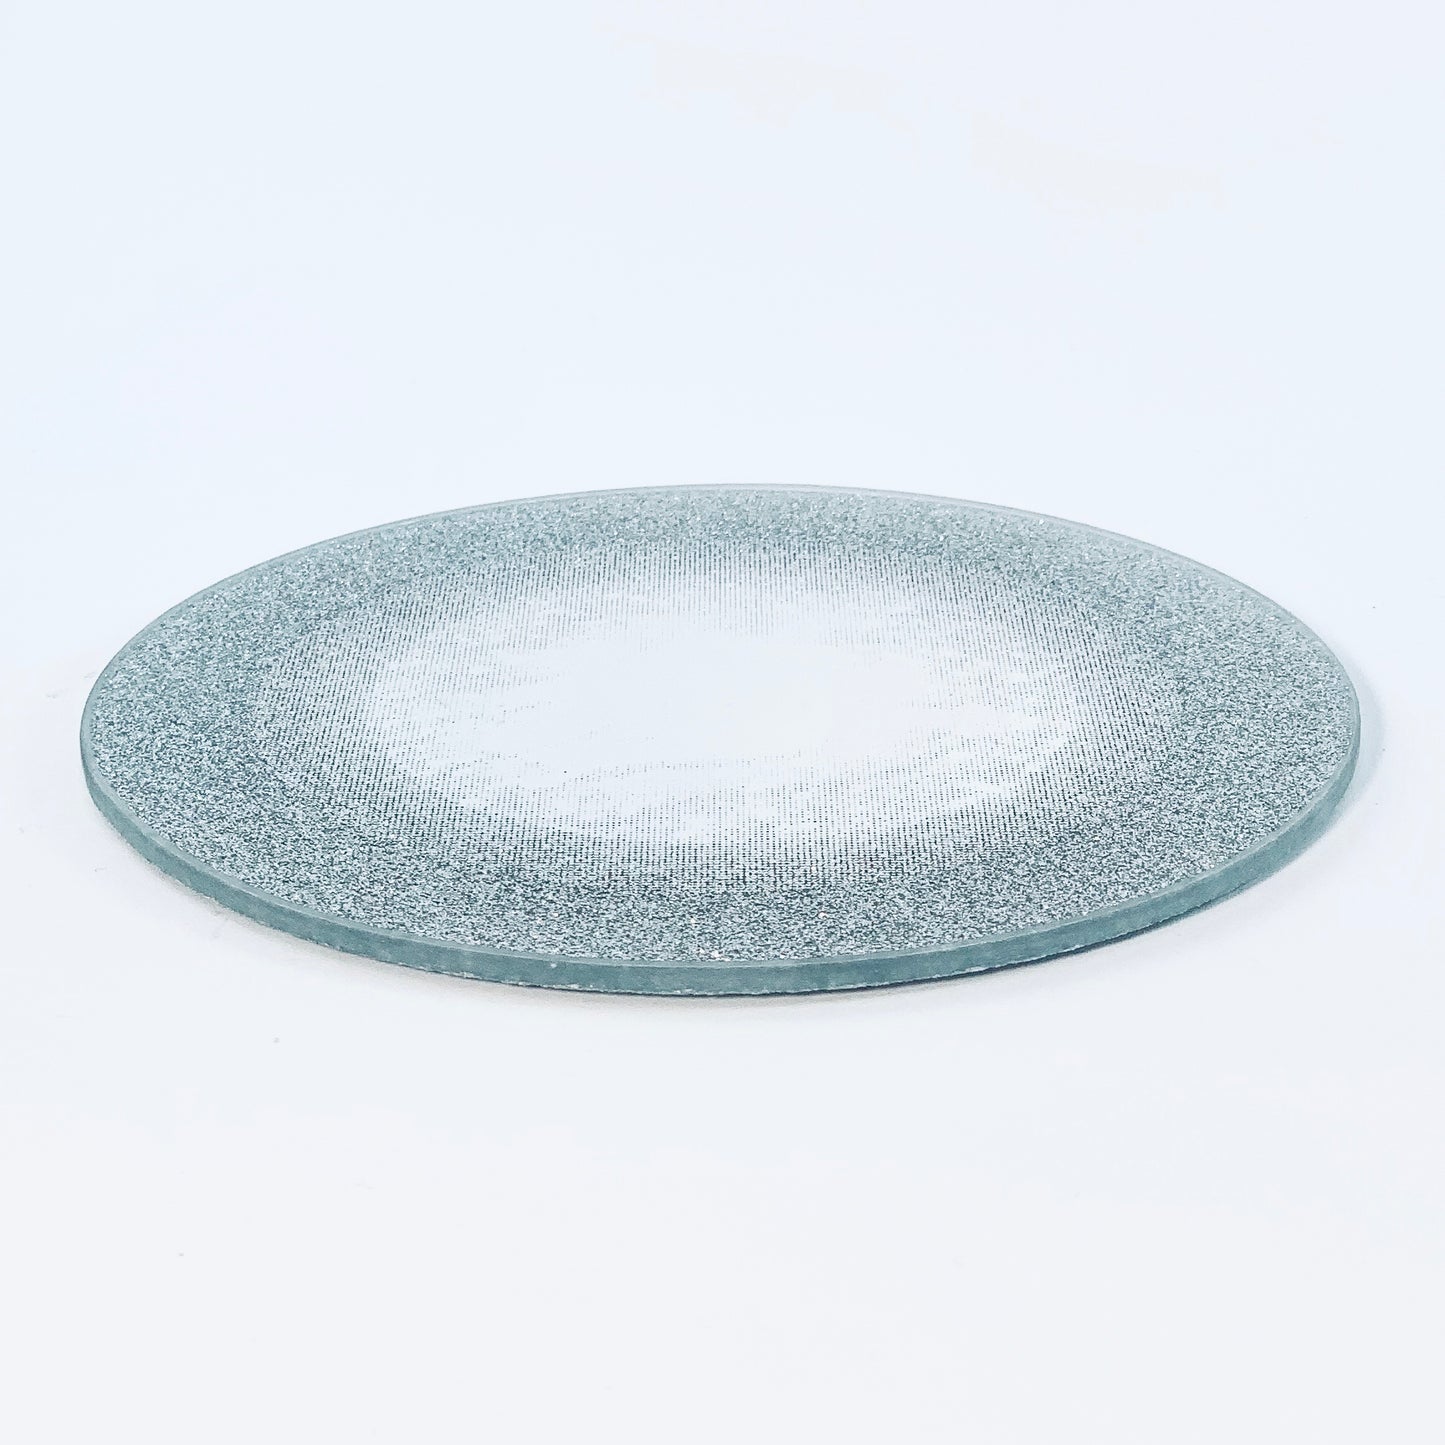 Glass candle pad, mirror surface and silver edge, ⌀ 15 cm